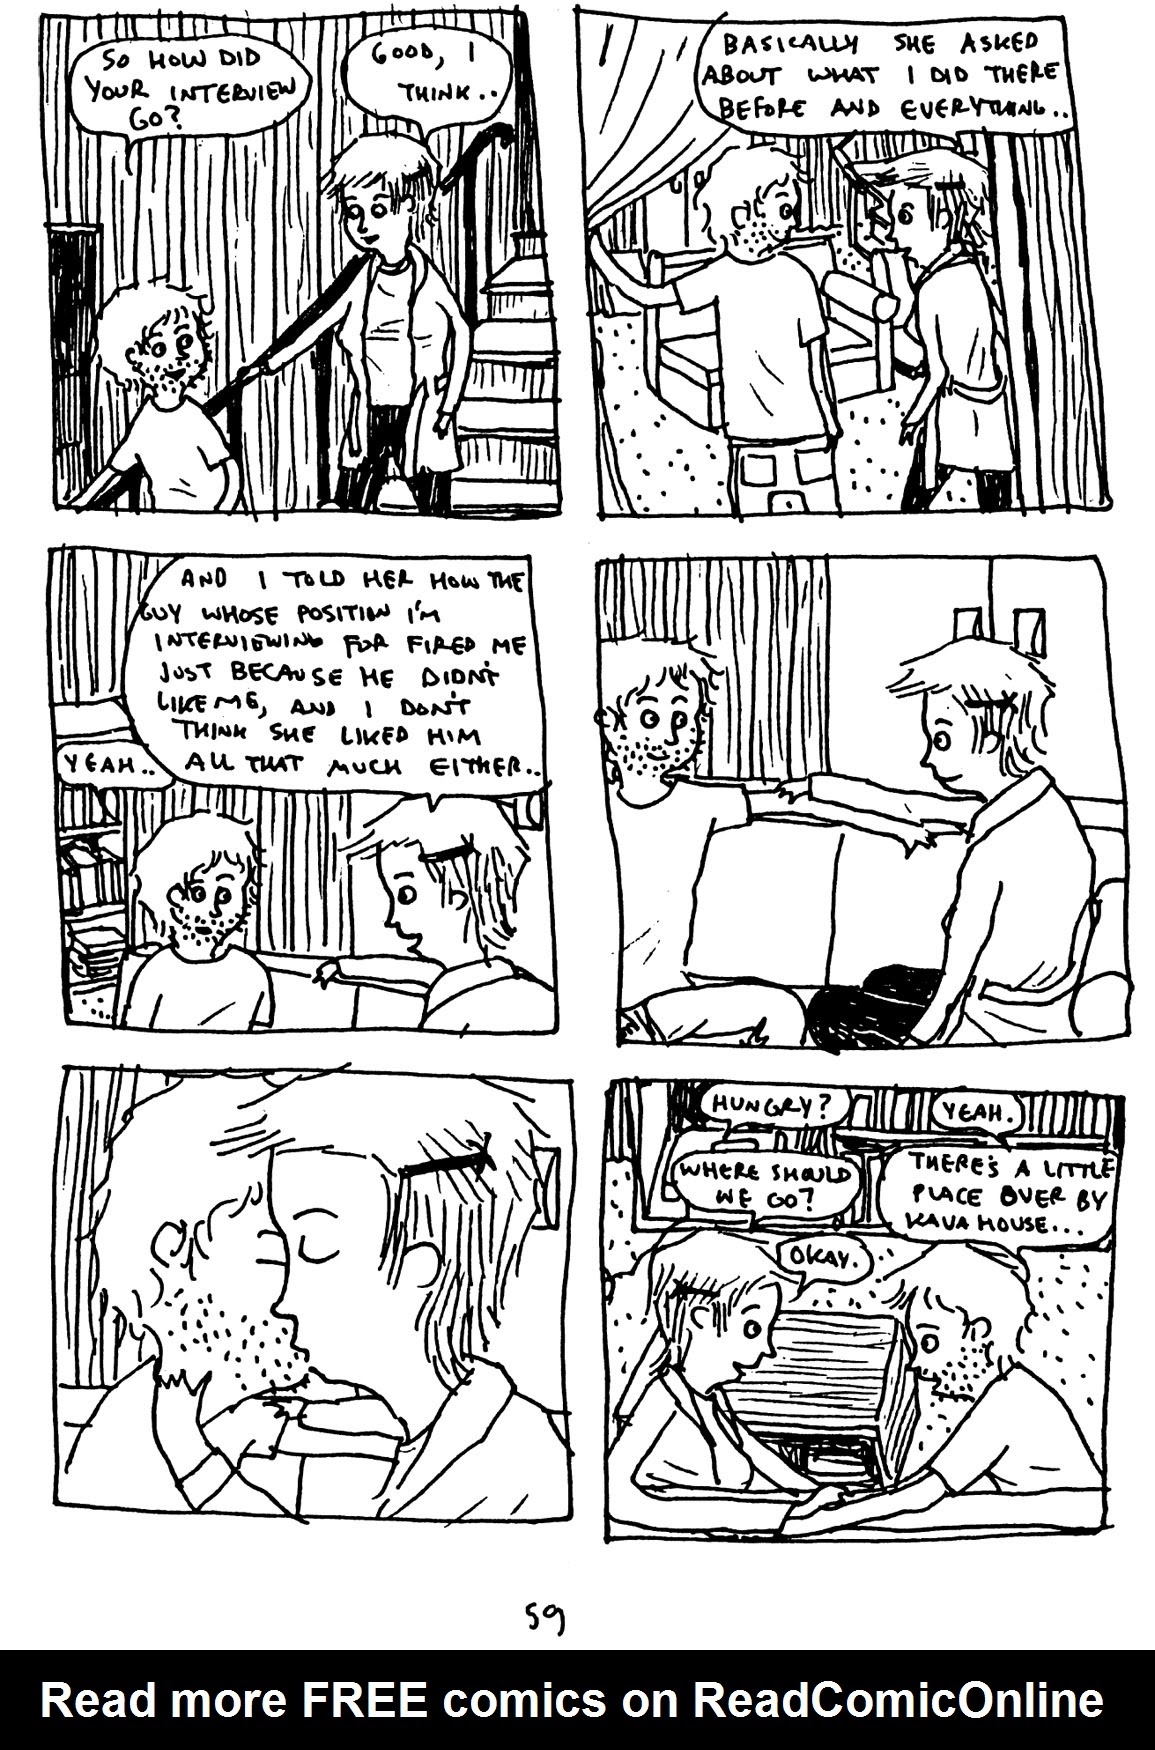 Read online Unlikely comic -  Issue # TPB (Part 1) - 70